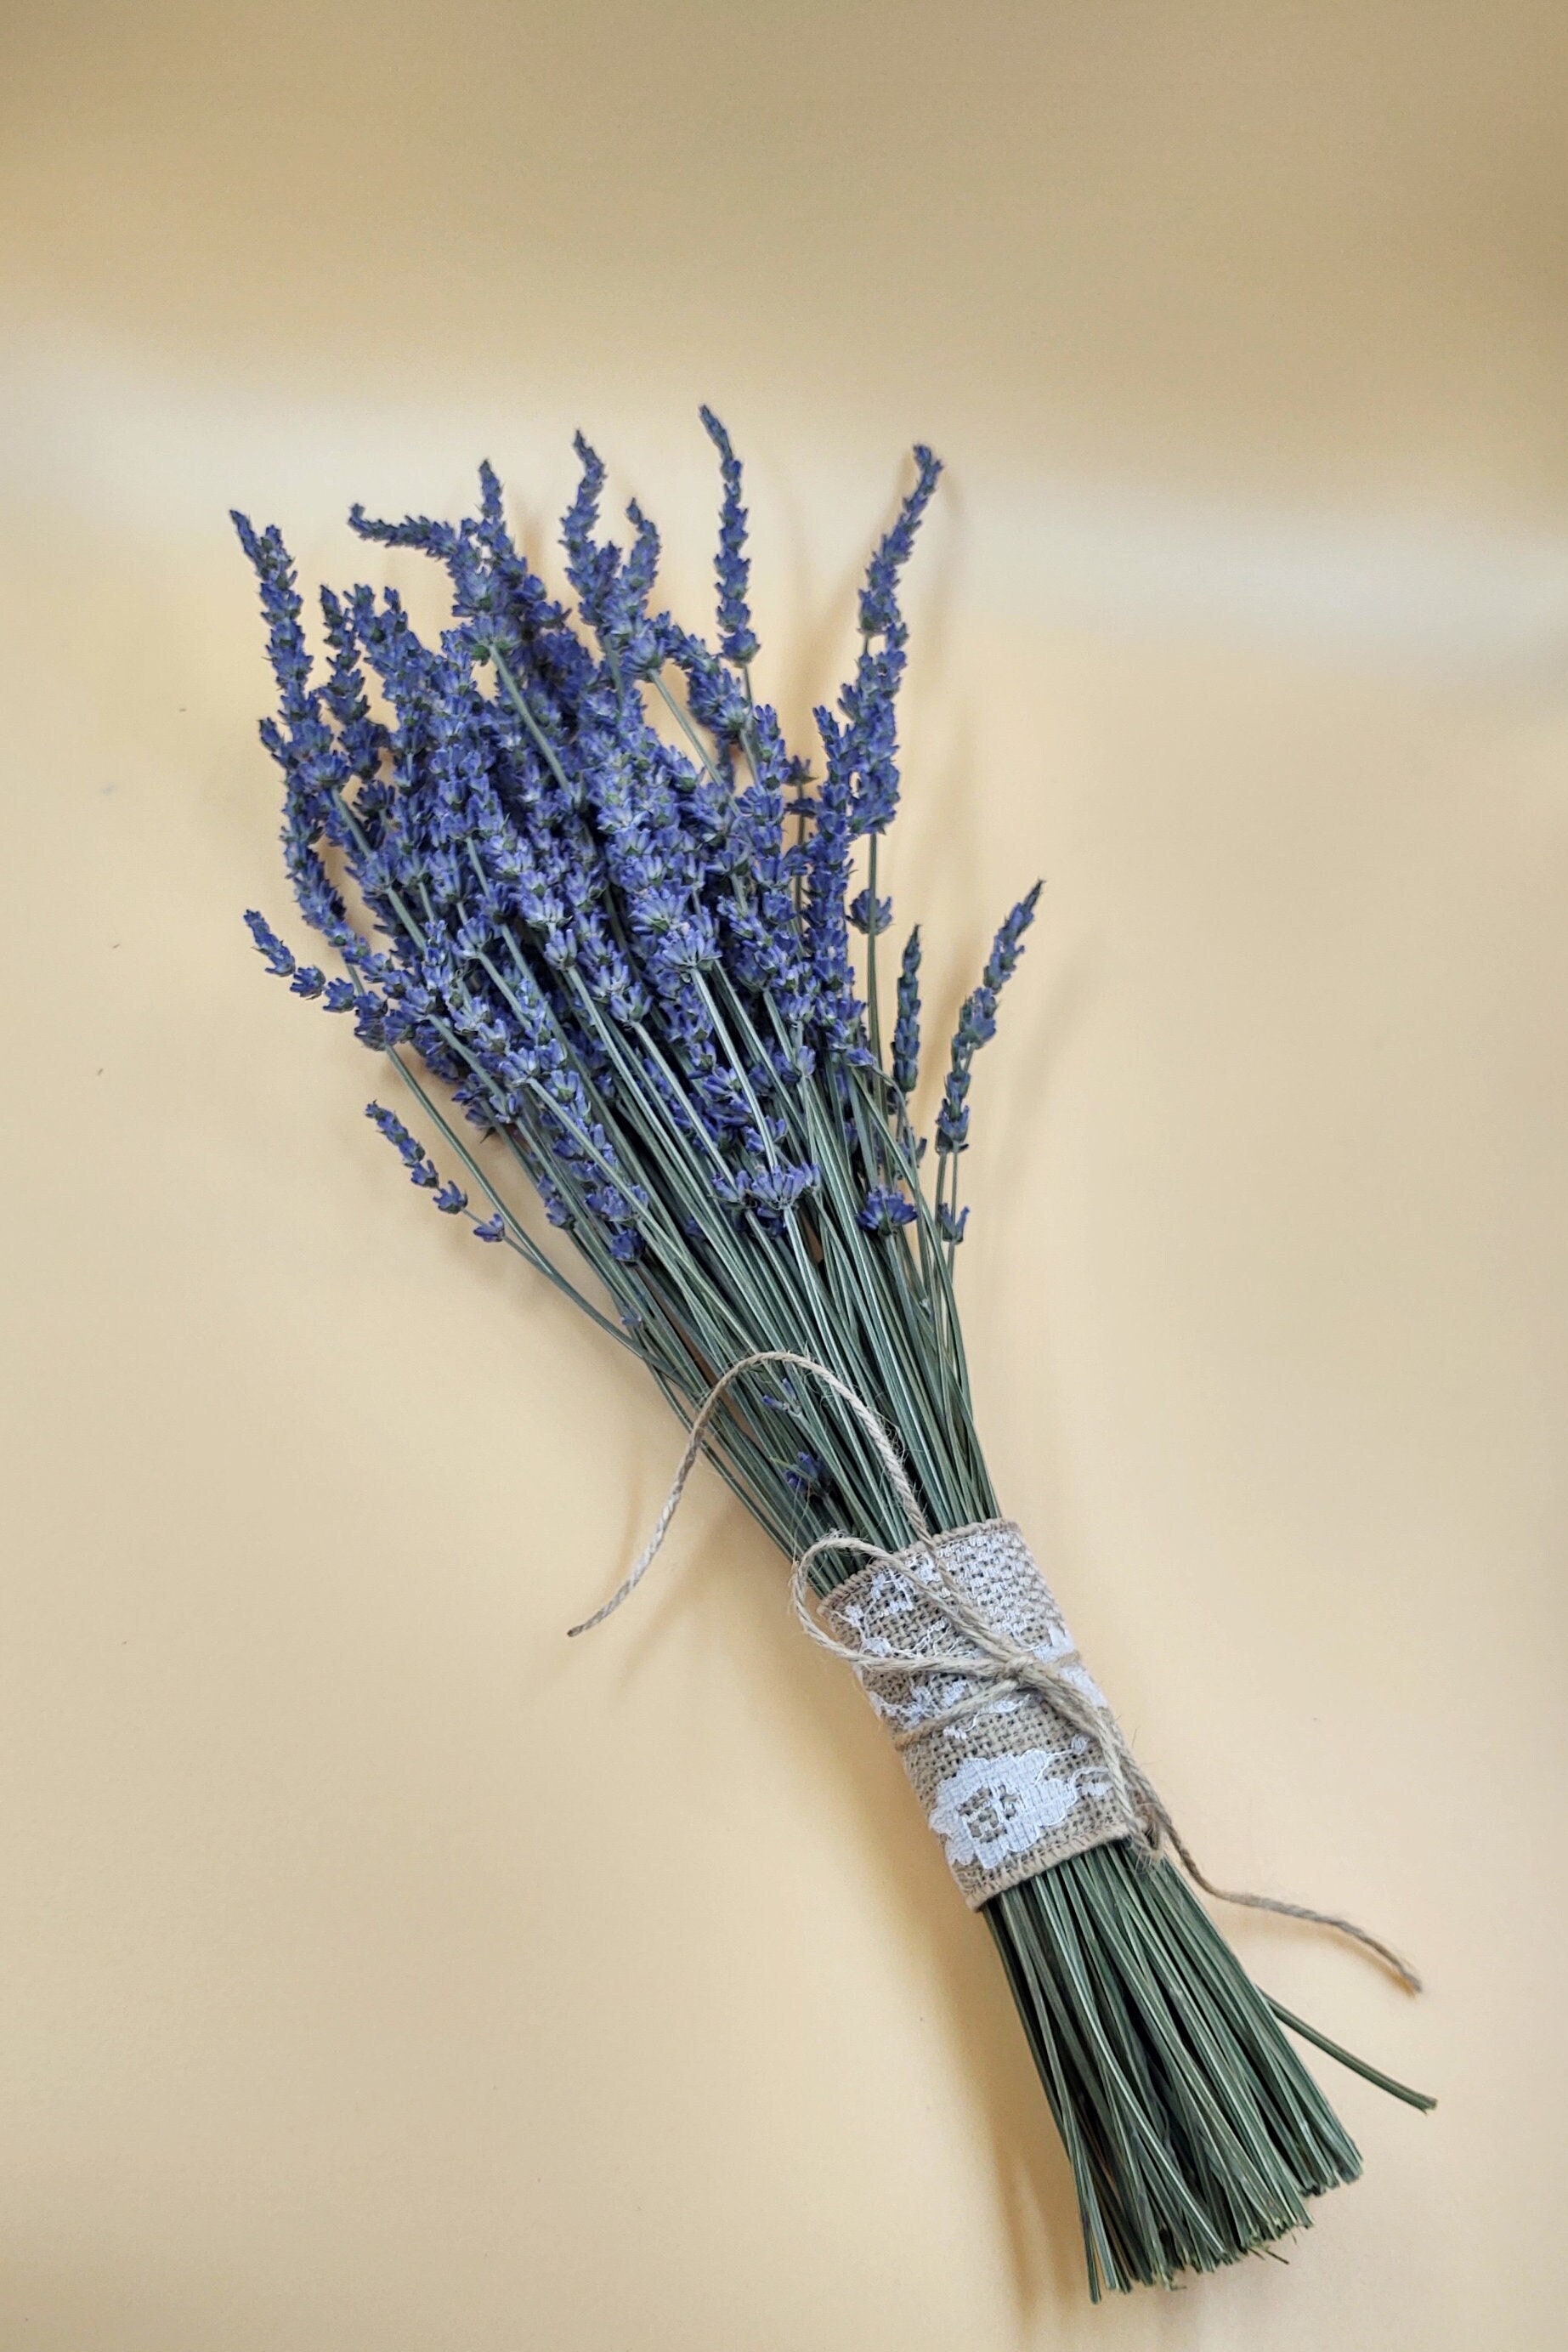 Bouquet of dry lavender flowers Stock Photo by ©Anegada 216766386